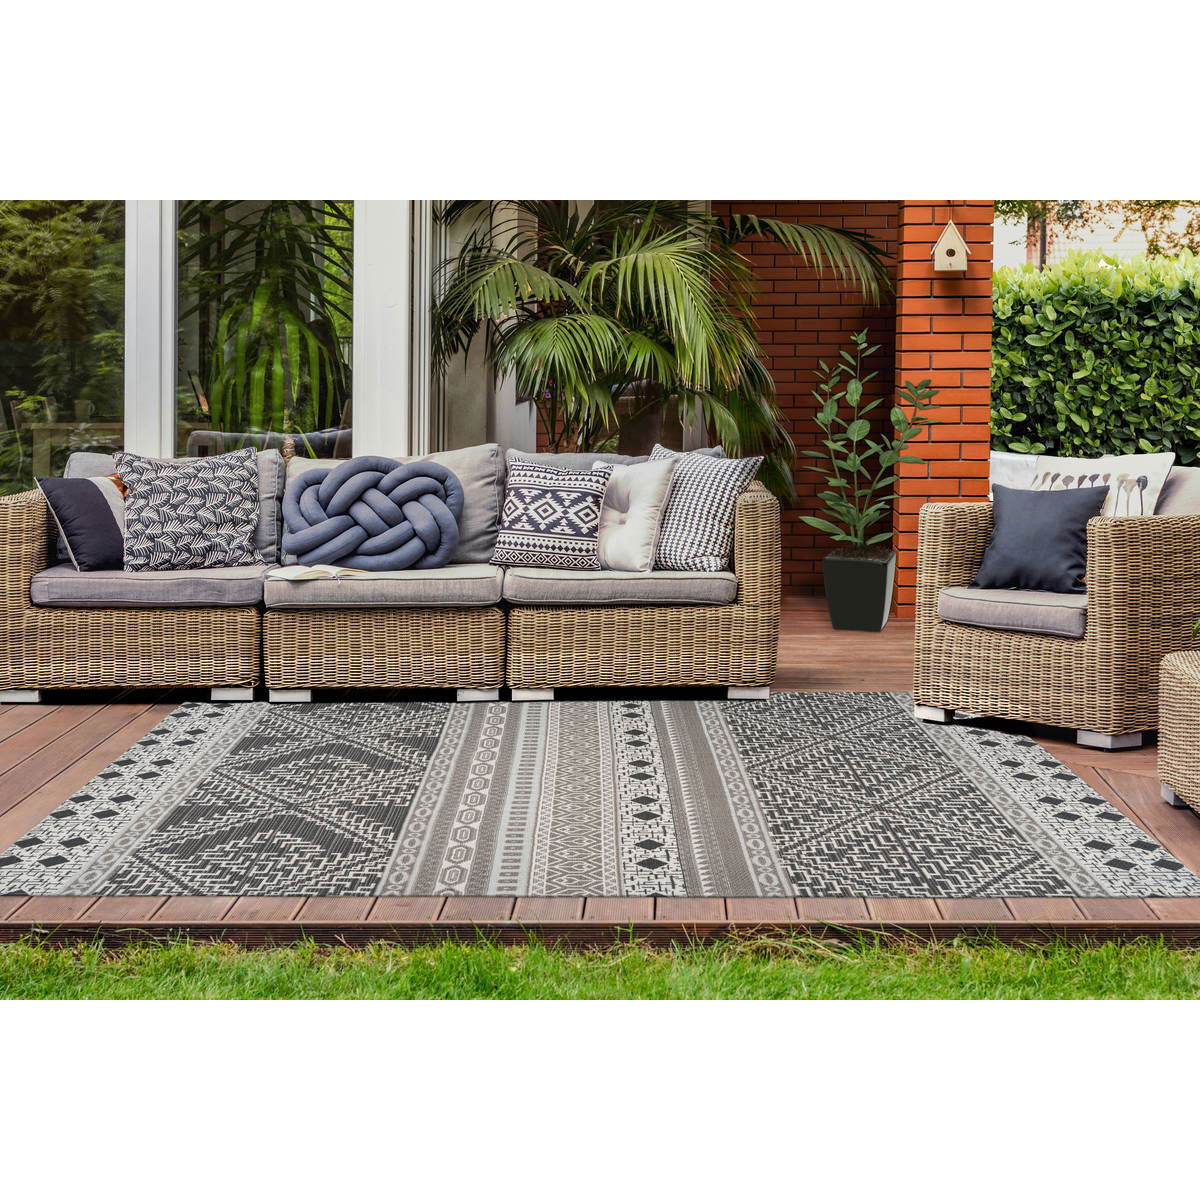 Outdoor-Teppich „Yoga 200“, taupe/creme | 80x150 | K000035461